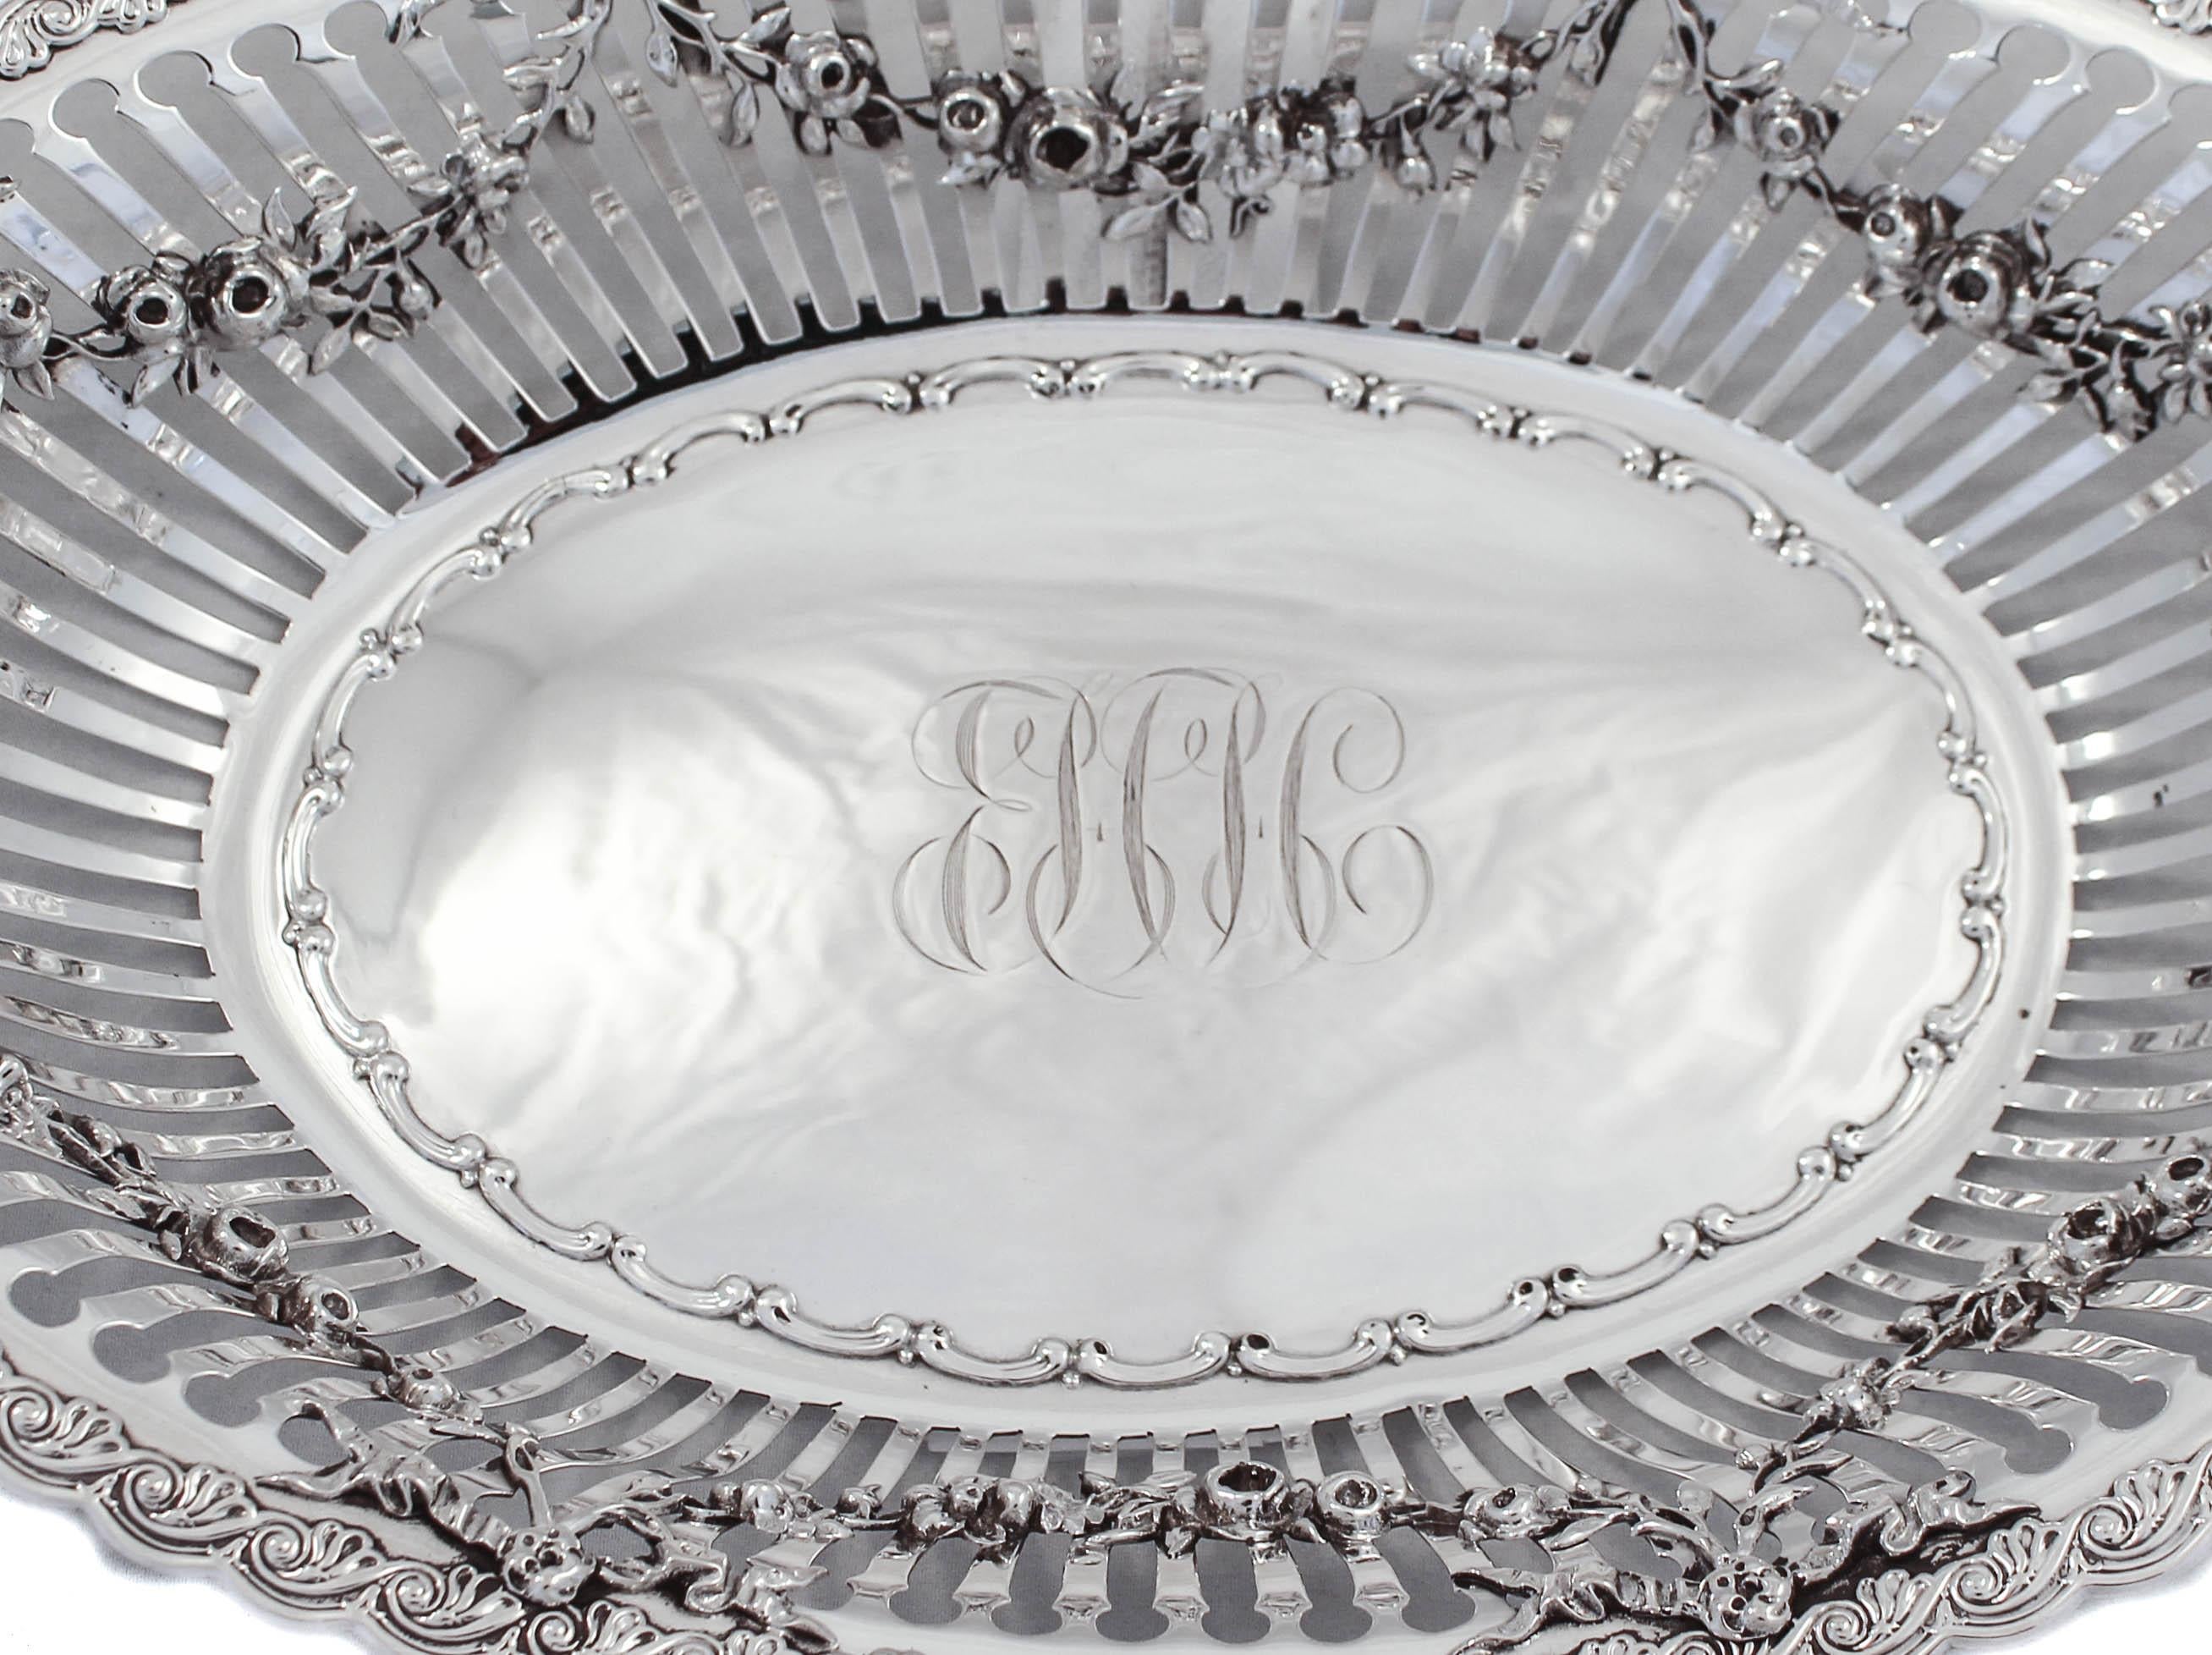 We are proud to offer this magnificent sterling silver breadbasket by the Whiting Manufacturing Company of New York, circa late 19th century. 
Grover Cleveland was the 24th President of the USA and there were only 43 states...
Being that this